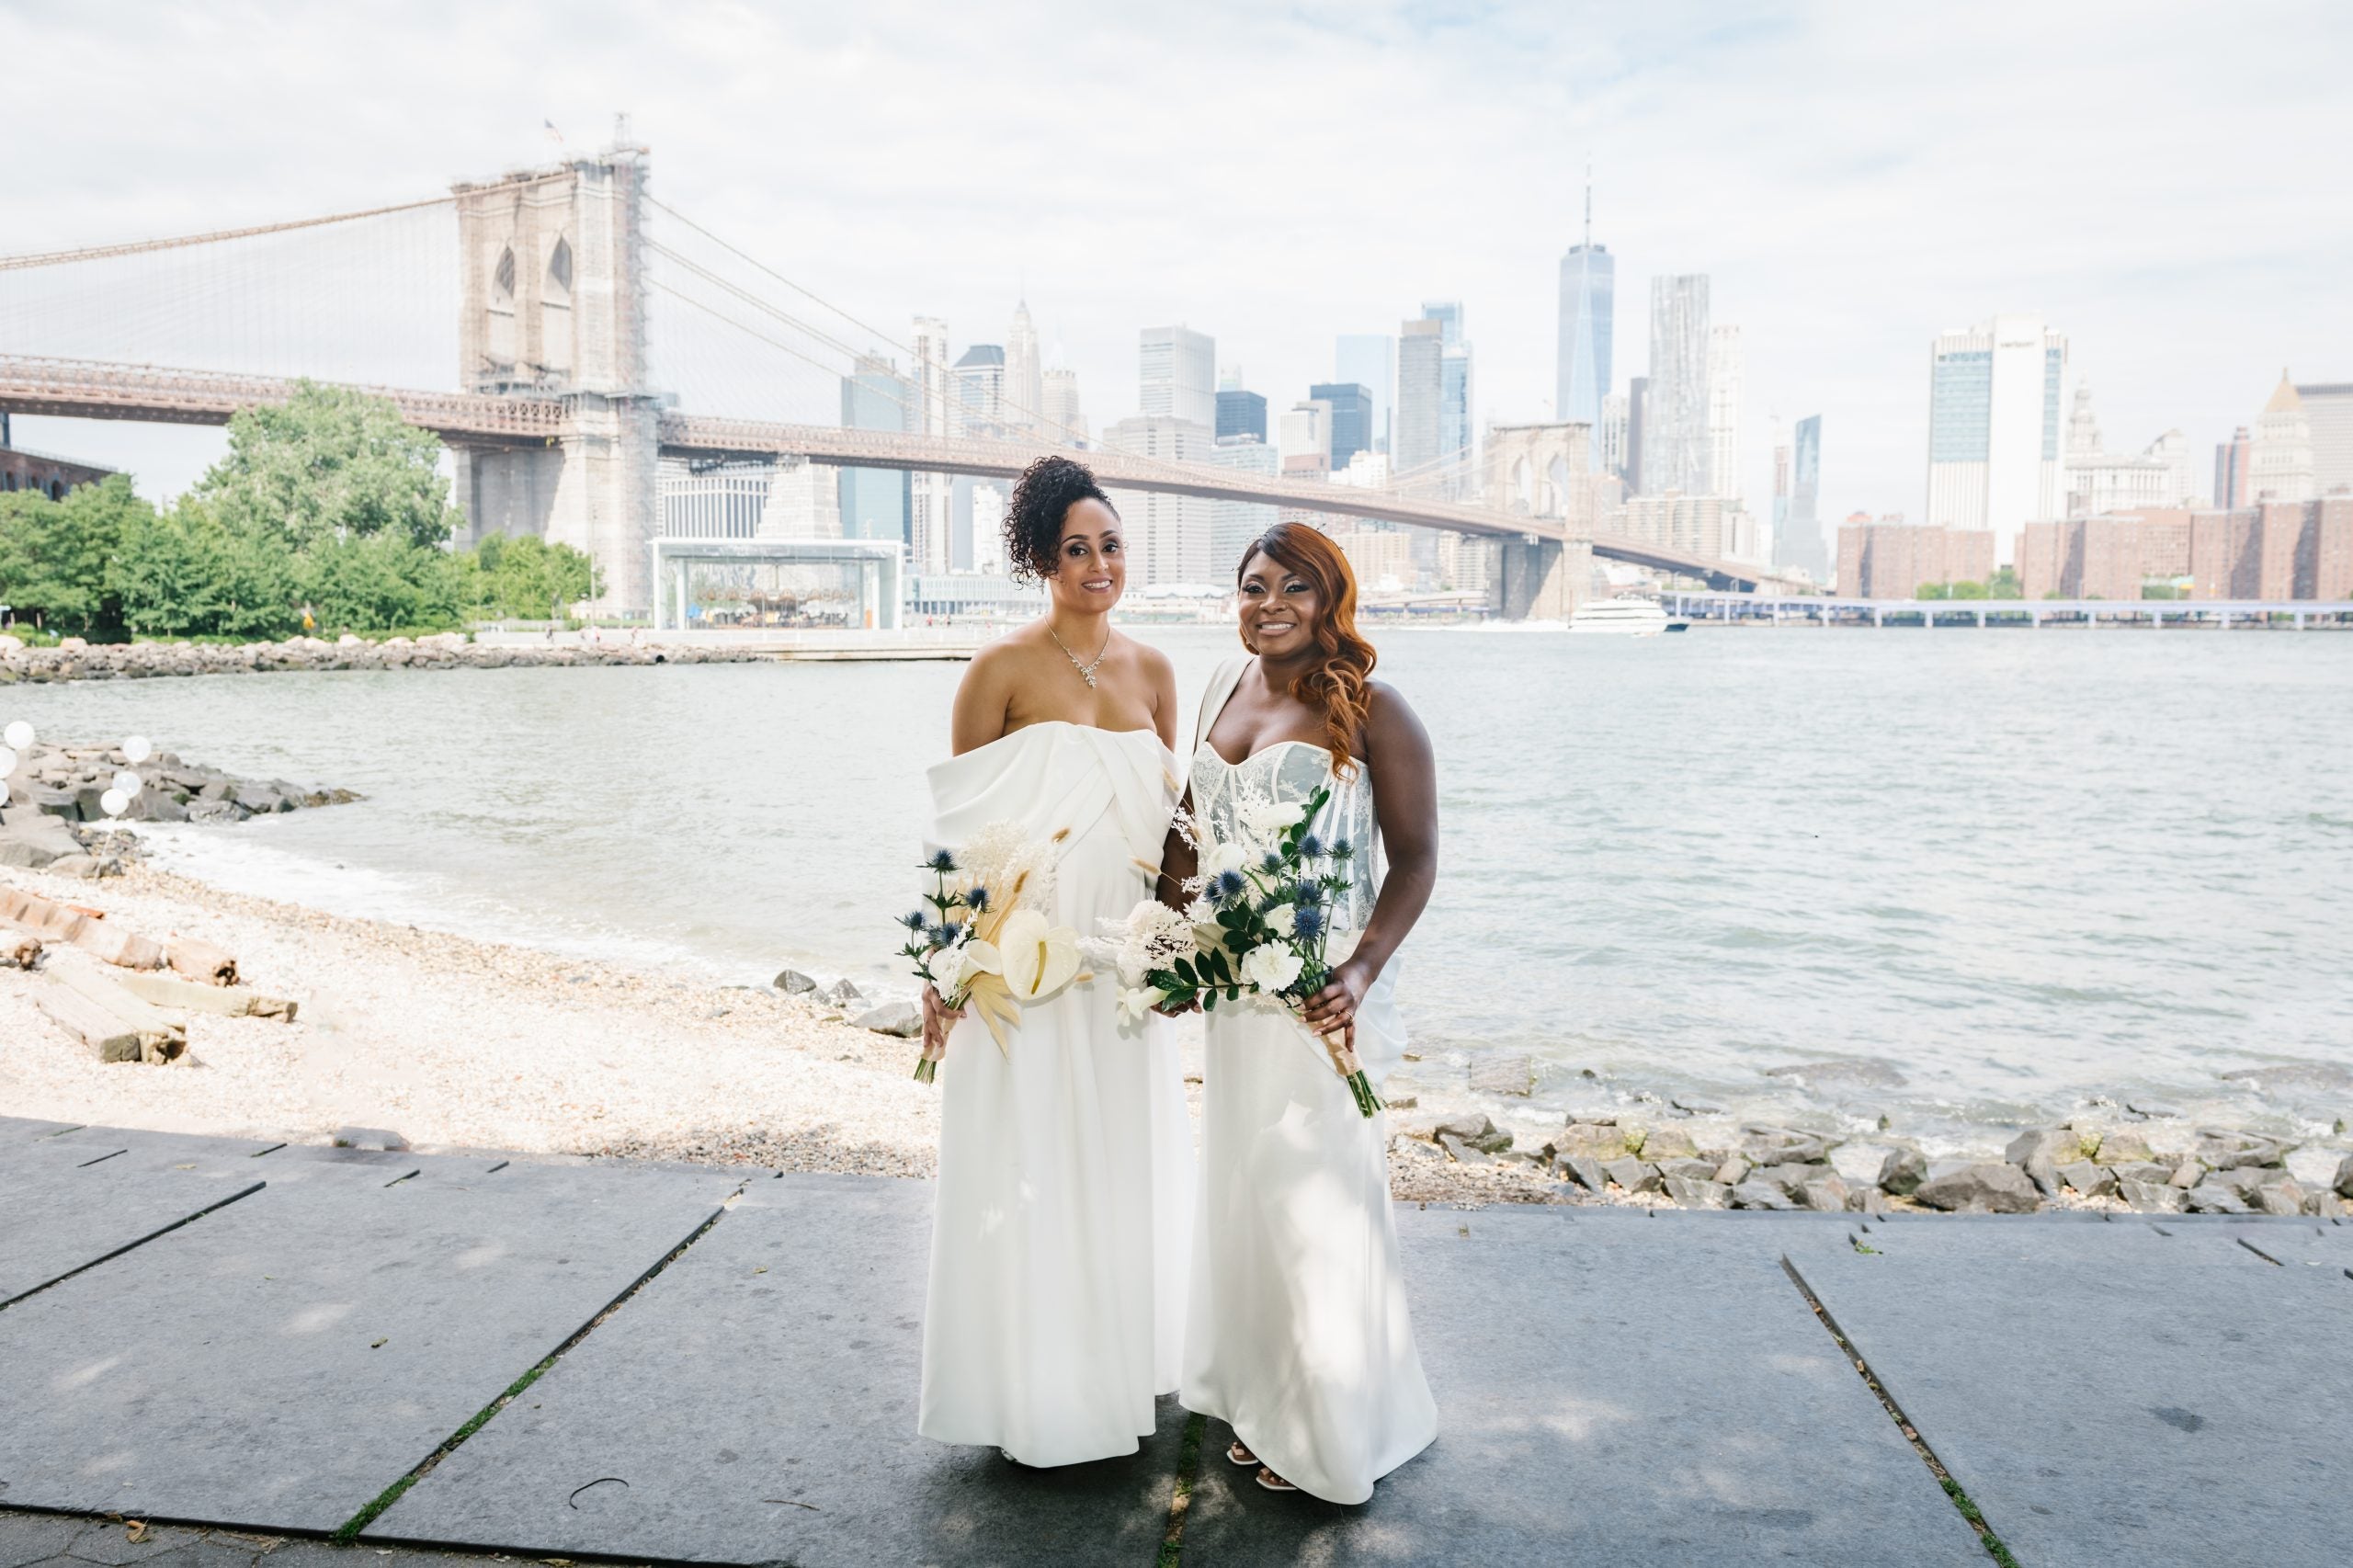 Bridal Bliss: After Proposing To Each Other A Week Apart, Ayanna & Sully Eloped In A Park In Brooklyn